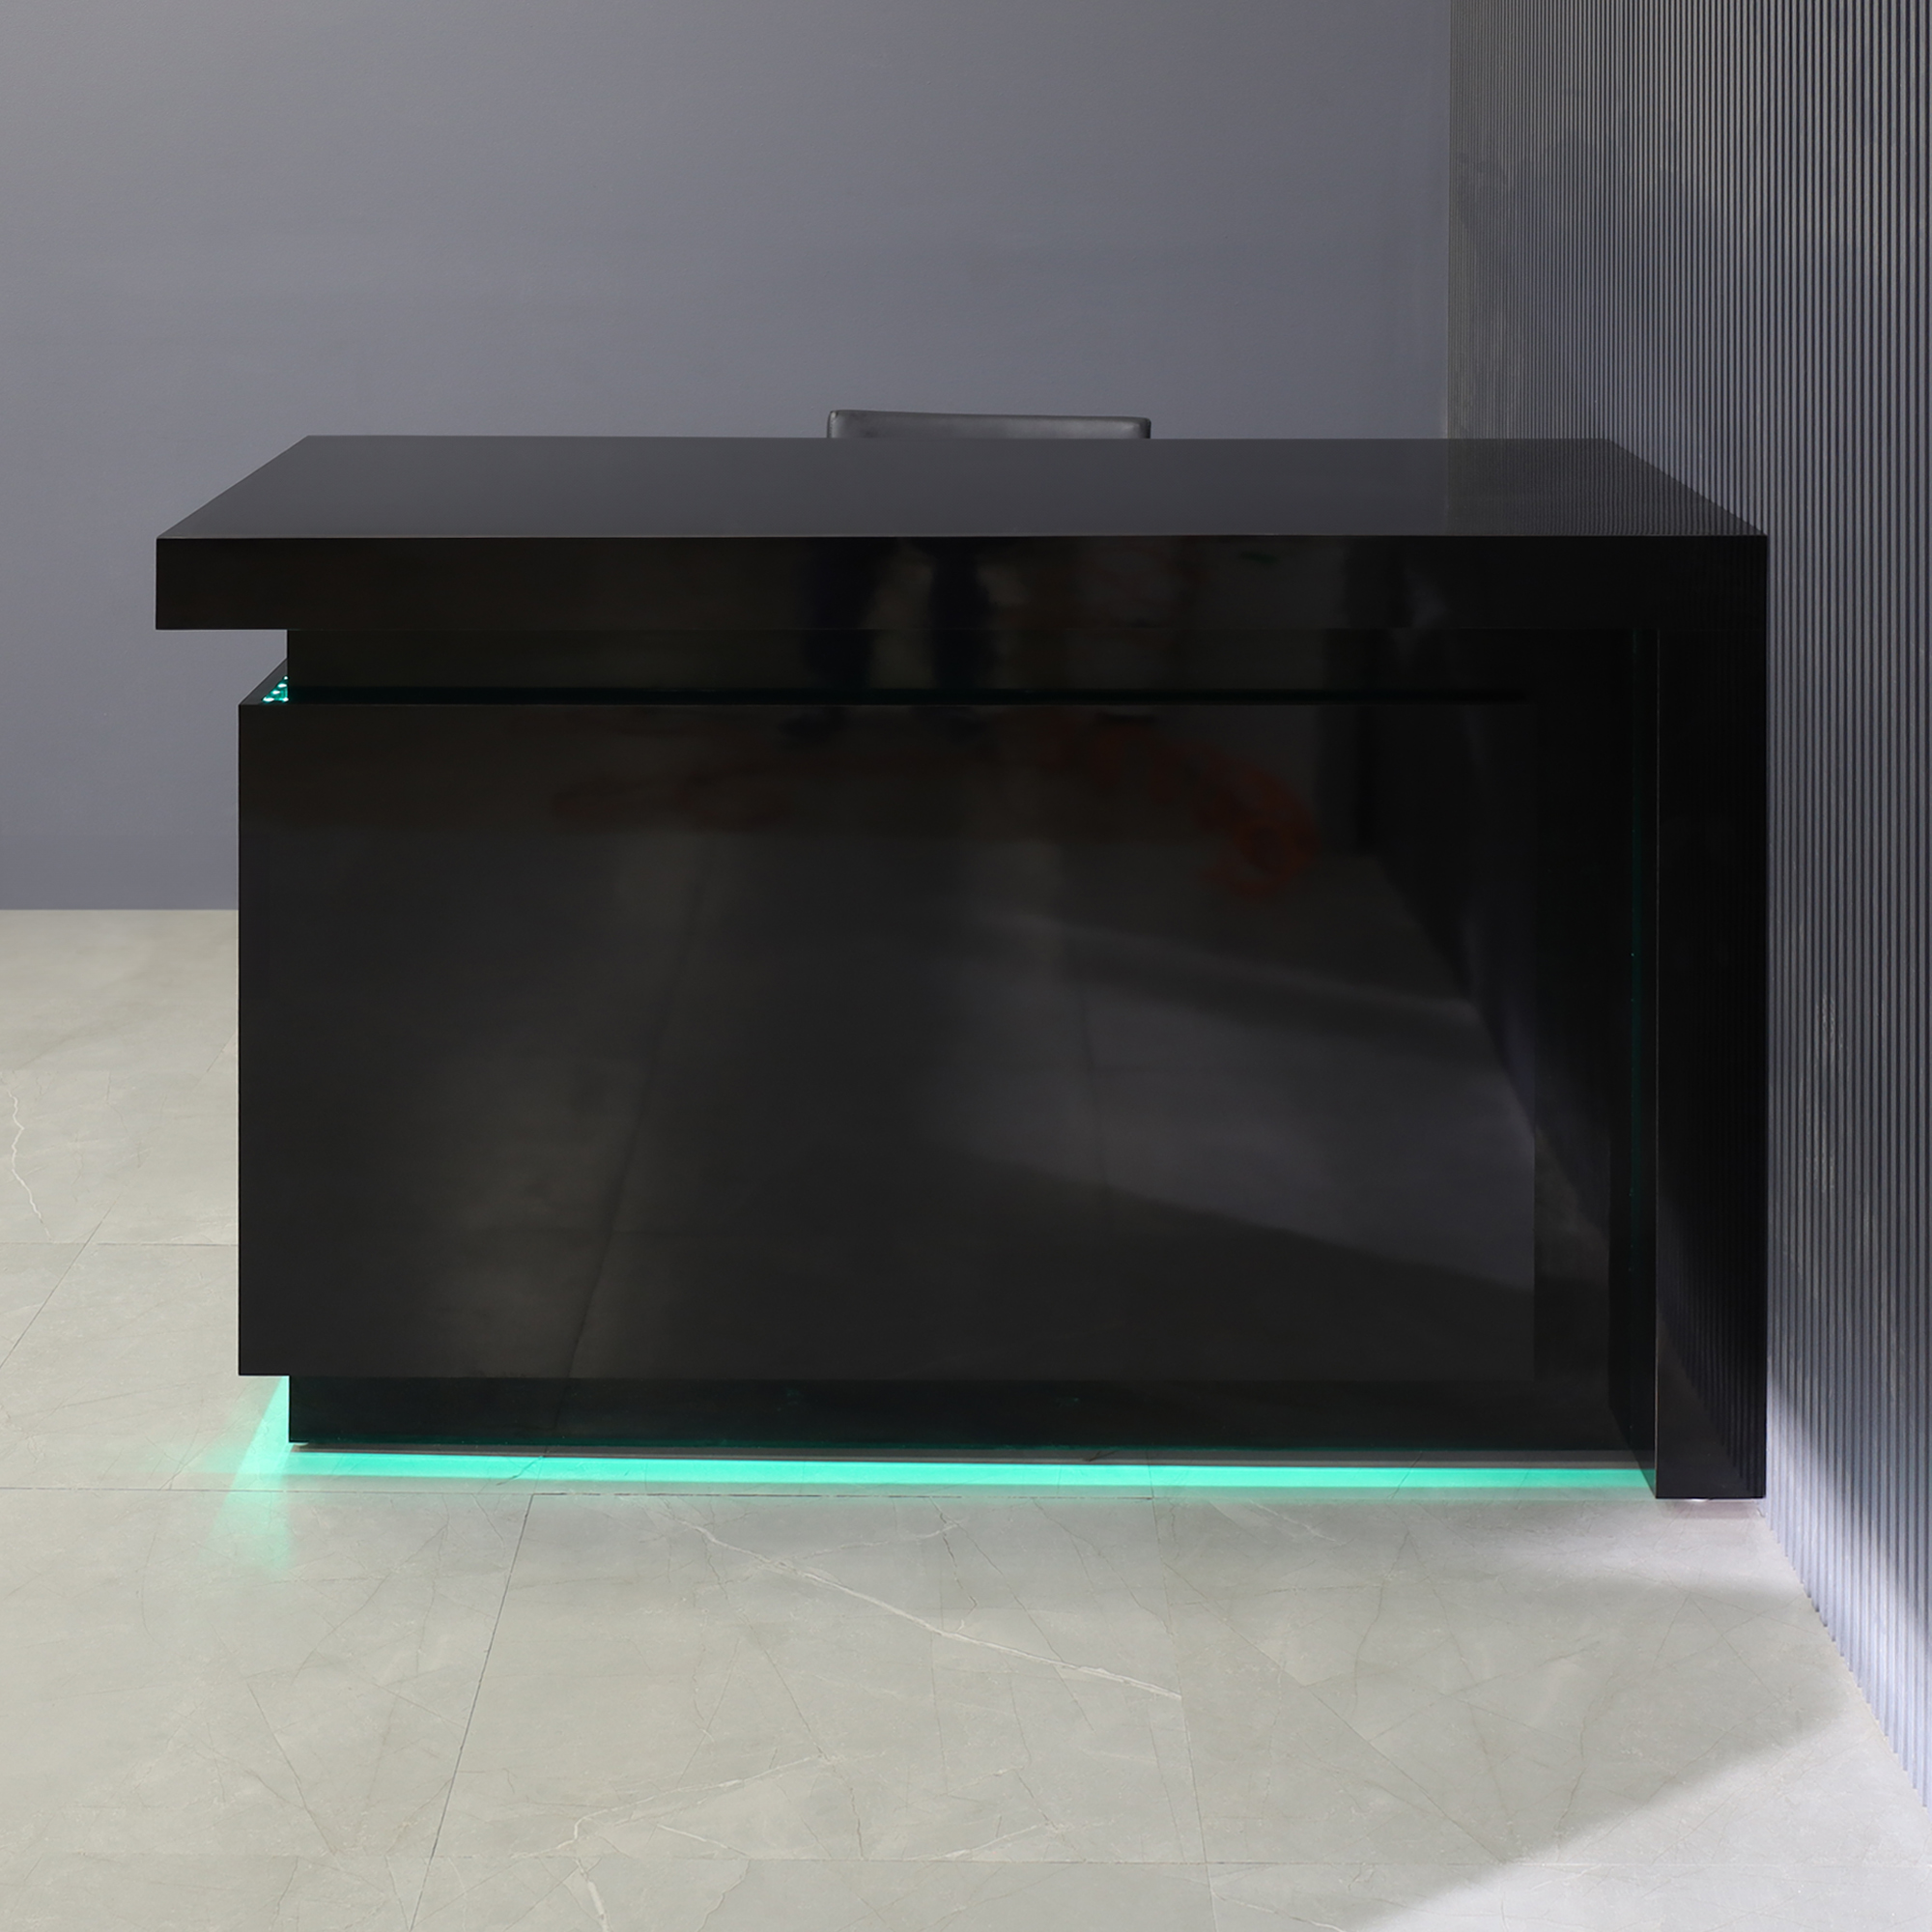 60-inch New York L-Shape Retail Custom Reception Desk in black gloss laminate desk, with color LED, shown here.